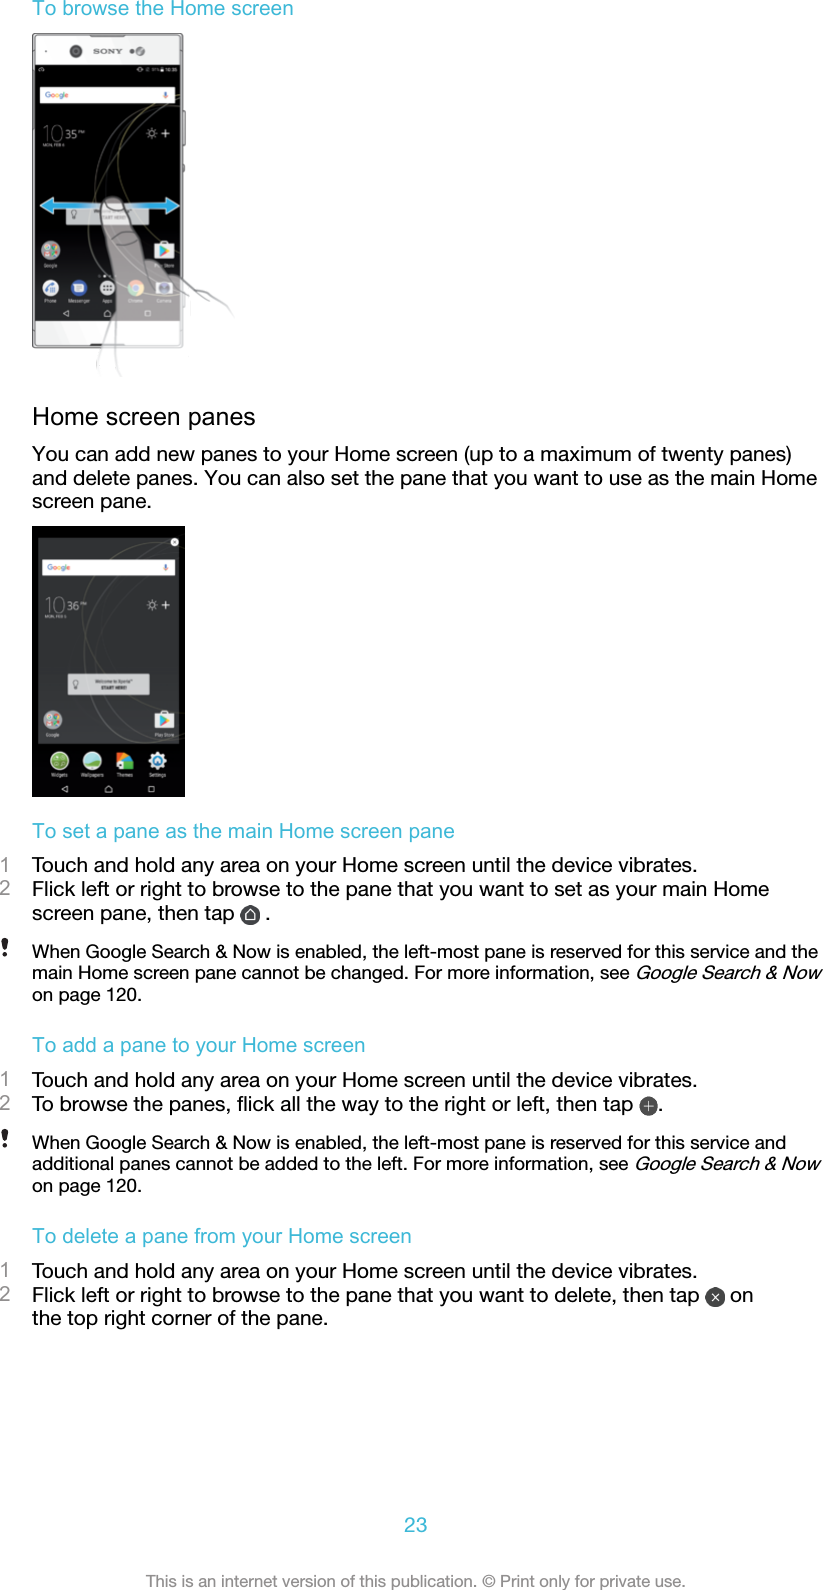 To browse the Home screenHome screen panesYou can add new panes to your Home screen (up to a maximum of twenty panes)and delete panes. You can also set the pane that you want to use as the main Homescreen pane.To set a pane as the main Home screen pane1Touch and hold any area on your Home screen until the device vibrates.2Flick left or right to browse to the pane that you want to set as your main Homescreen pane, then tap   .When Google Search &amp; Now is enabled, the left-most pane is reserved for this service and themain Home screen pane cannot be changed. For more information, see Google Search &amp; Nowon page 120.To add a pane to your Home screen1Touch and hold any area on your Home screen until the device vibrates.2To browse the panes, ﬂick all the way to the right or left, then tap  .When Google Search &amp; Now is enabled, the left-most pane is reserved for this service andadditional panes cannot be added to the left. For more information, see Google Search &amp; Nowon page 120.To delete a pane from your Home screen1Touch and hold any area on your Home screen until the device vibrates.2Flick left or right to browse to the pane that you want to delete, then tap   onthe top right corner of the pane.23This is an internet version of this publication. © Print only for private use.